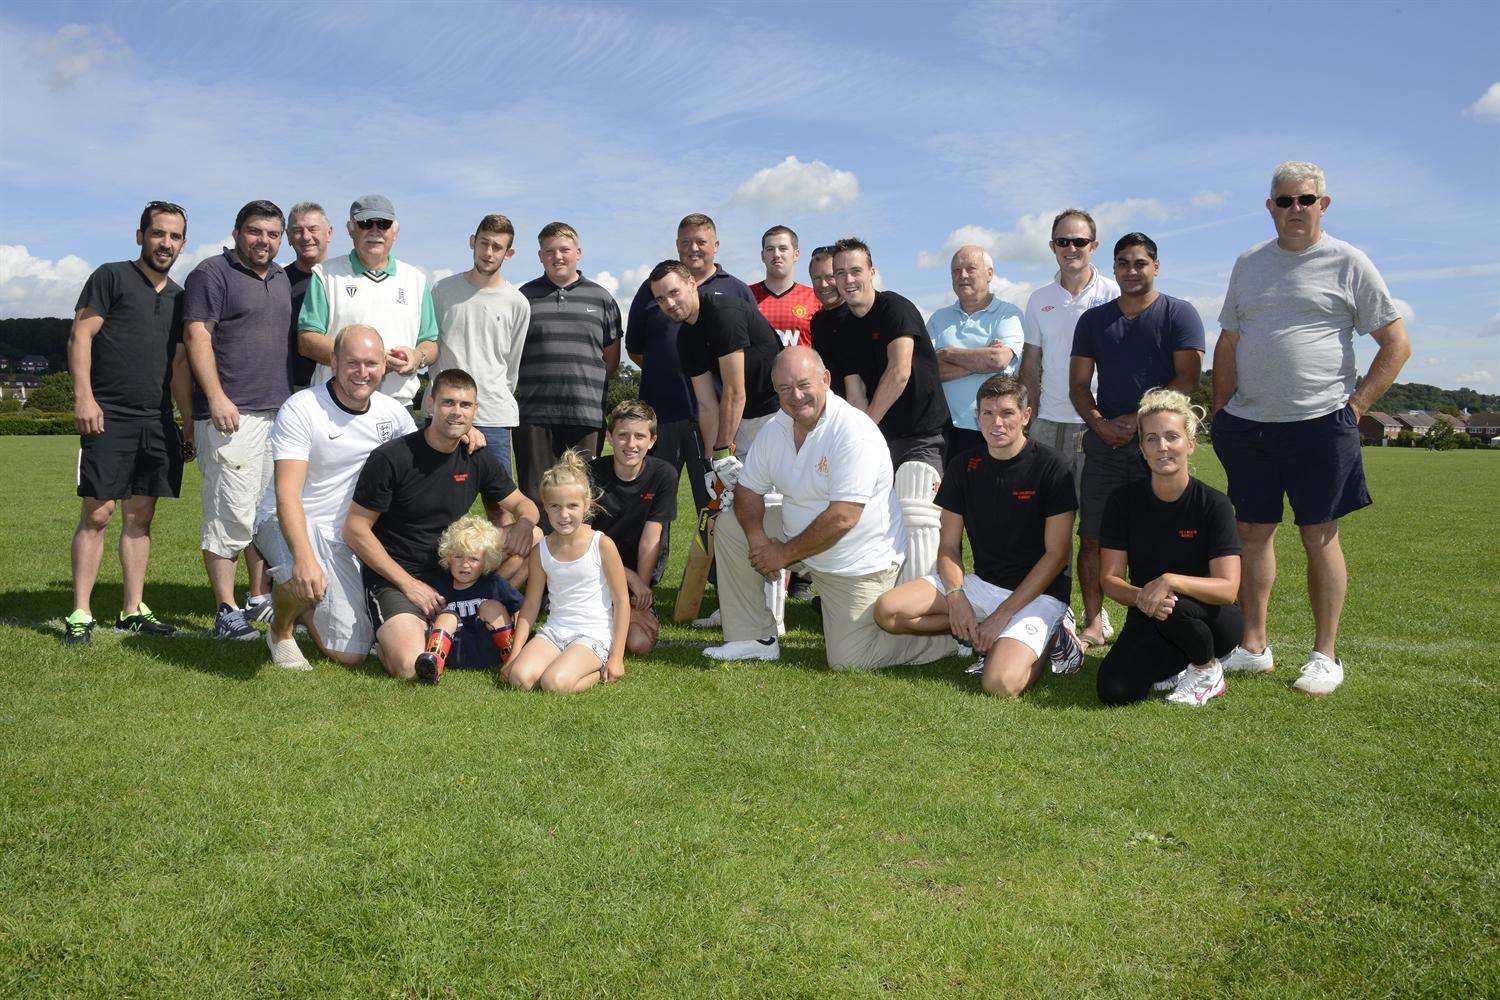 Firefighters from Hythe took on the Hythe Albion Social Club in their annual charity cricket match.